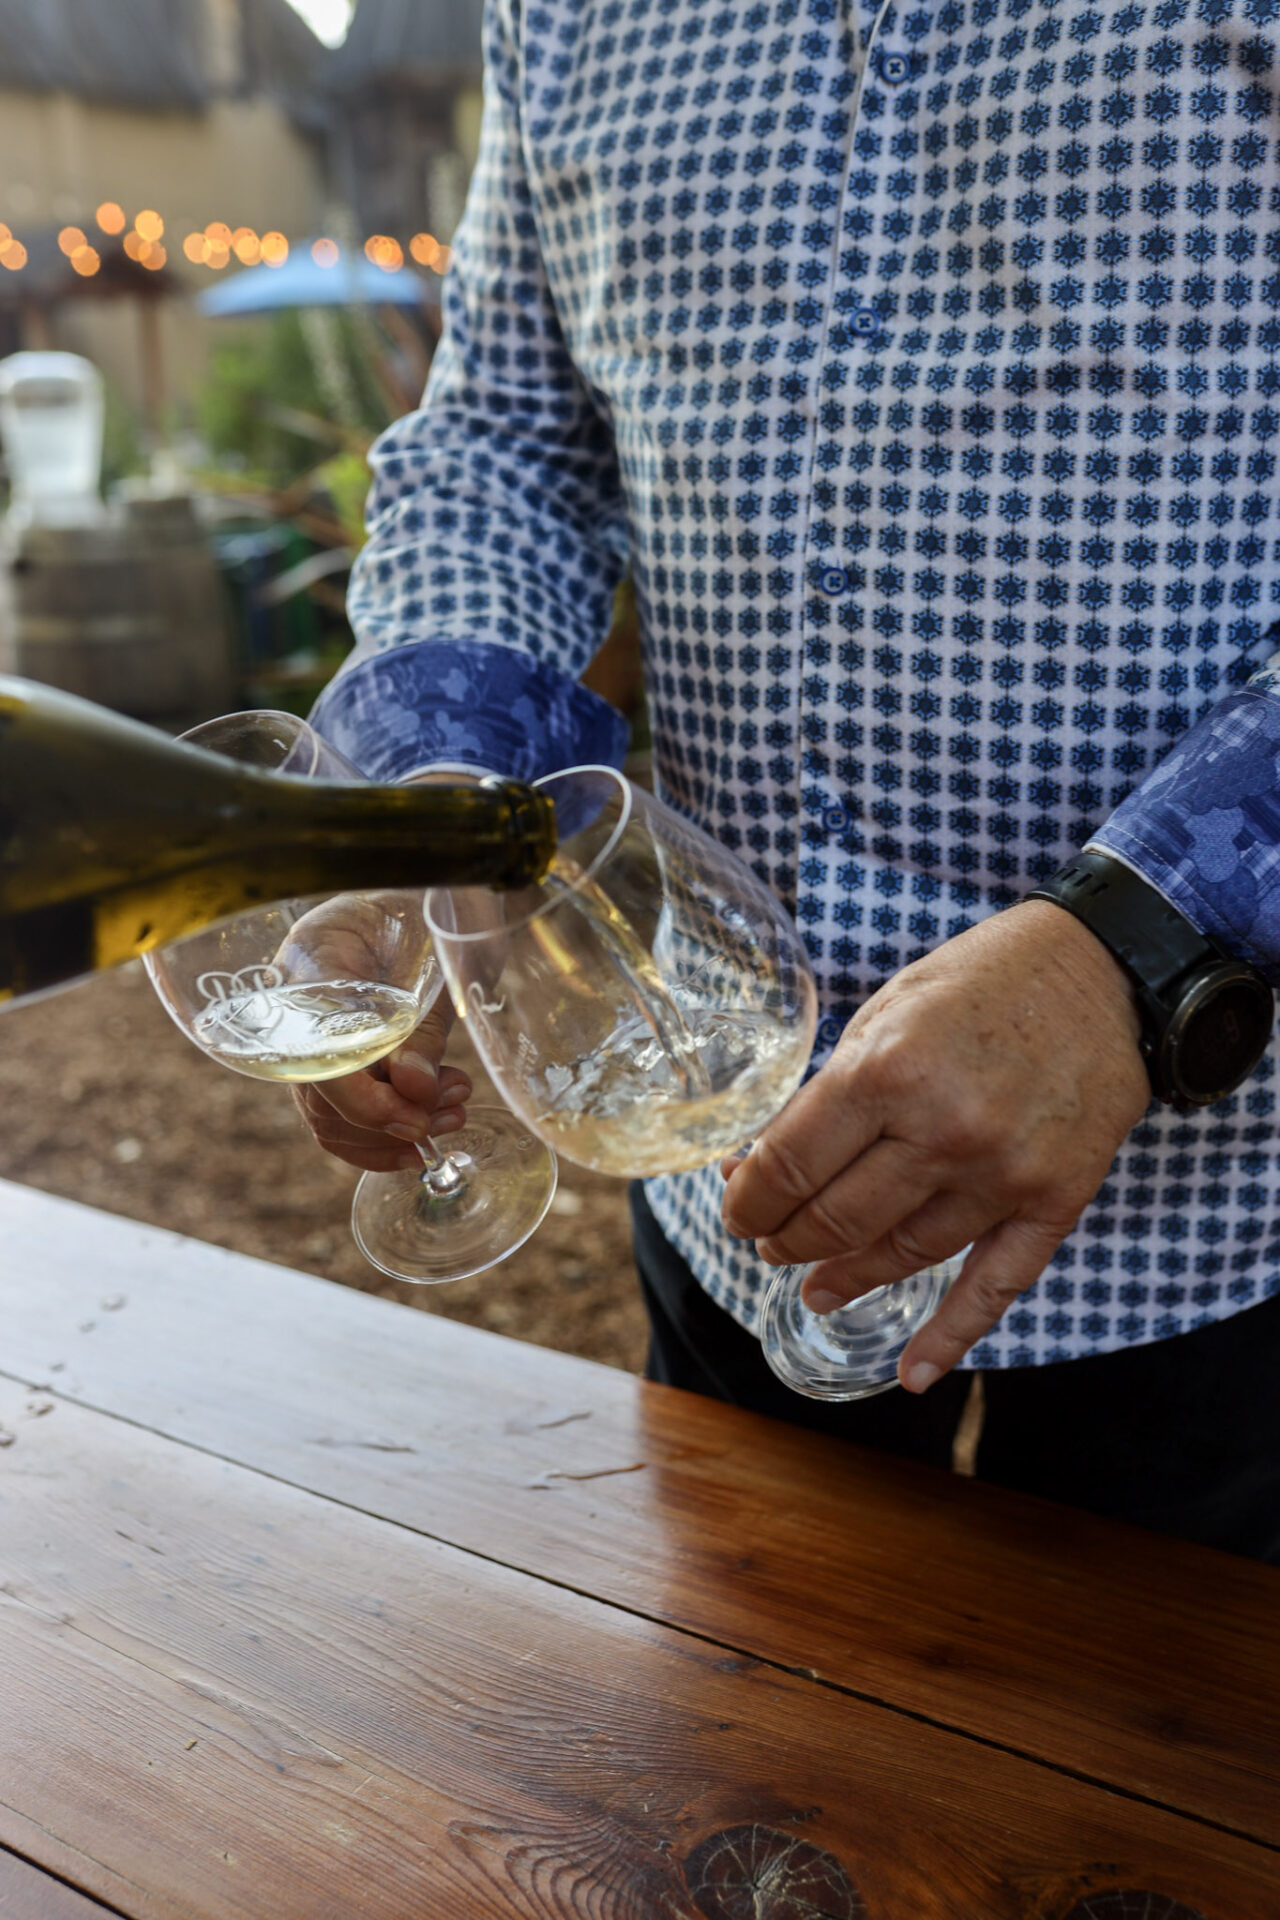 A man's hands holding two glasses while someone pours white wine